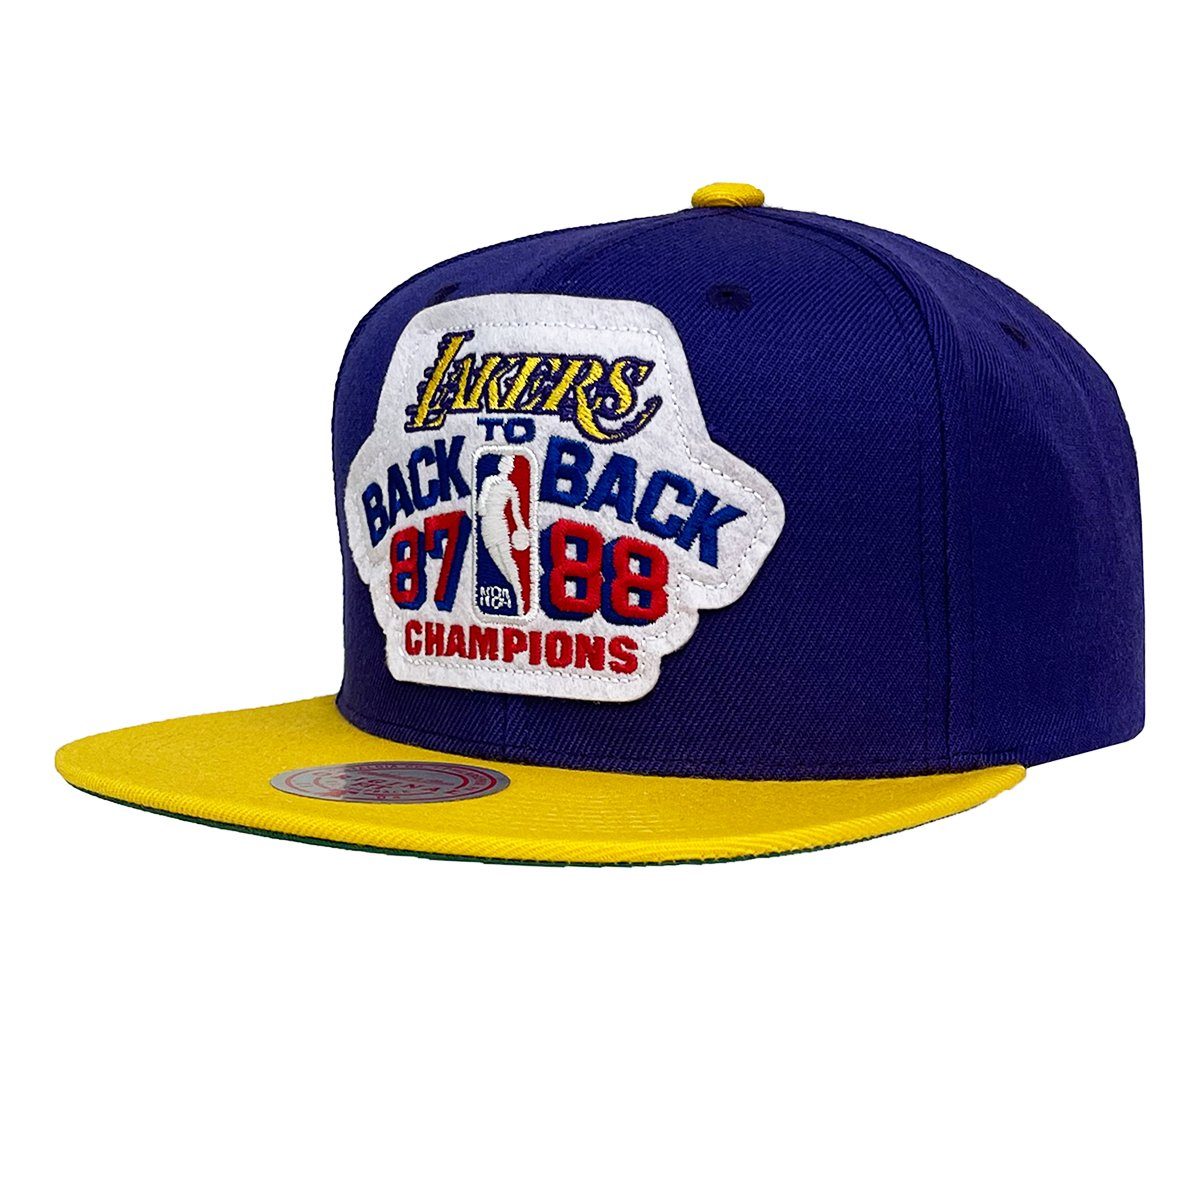 Mitchell & Ness Snapback Cap NBA 87/88 Back To Back Champs Los Angeles Lakers